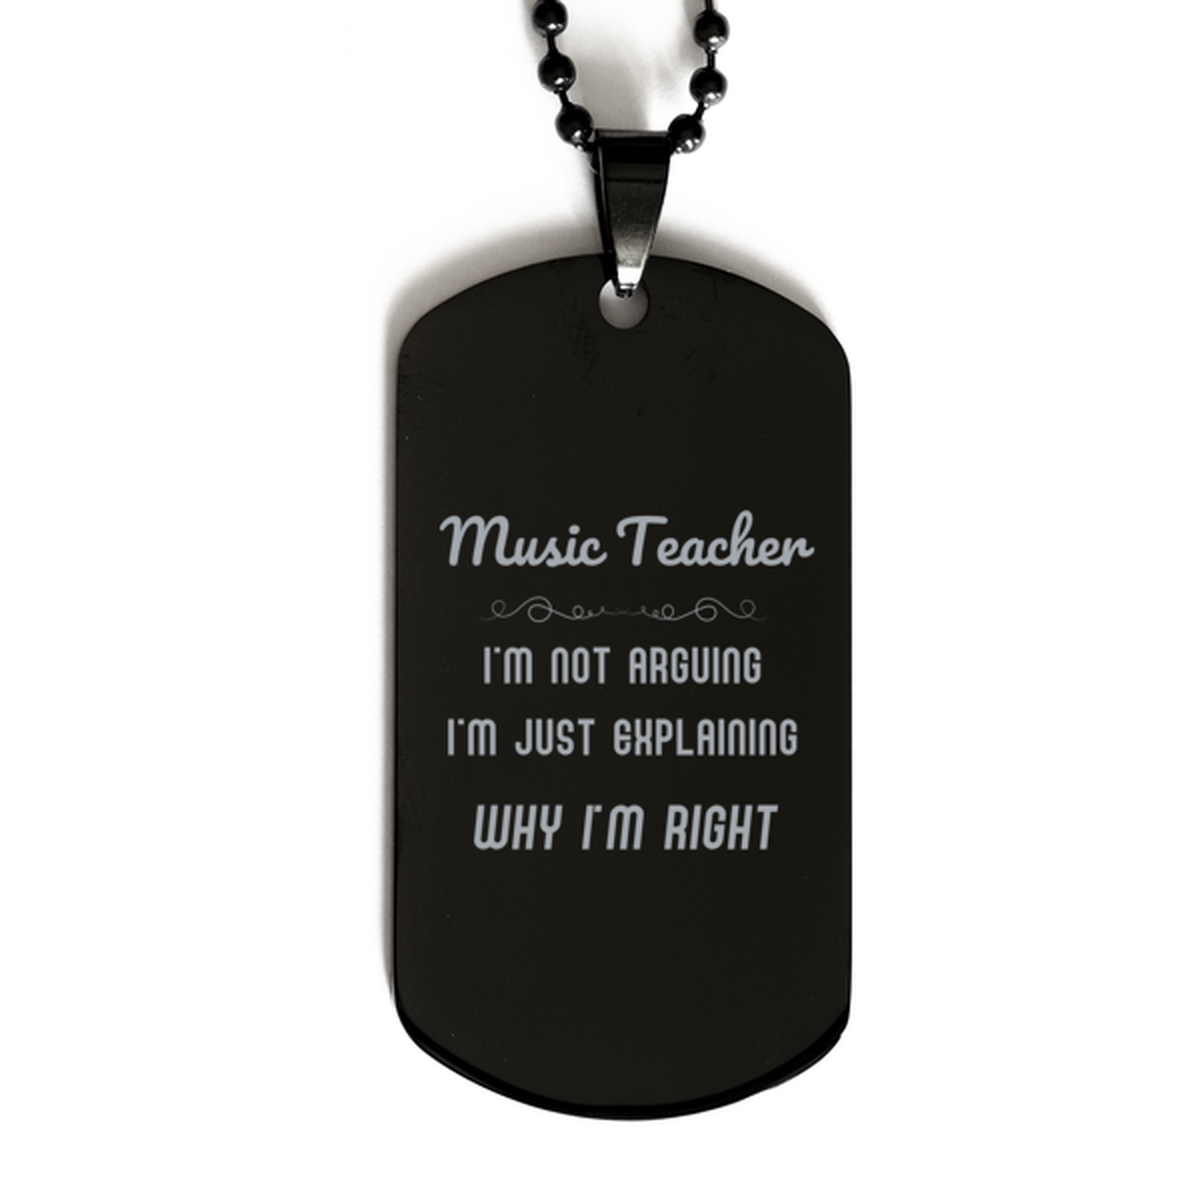 Music Teacher I'm not Arguing. I'm Just Explaining Why I'm RIGHT Black Dog Tag, Funny Saying Quote Music Teacher Gifts For Music Teacher Graduation Birthday Christmas Gifts for Men Women Coworker